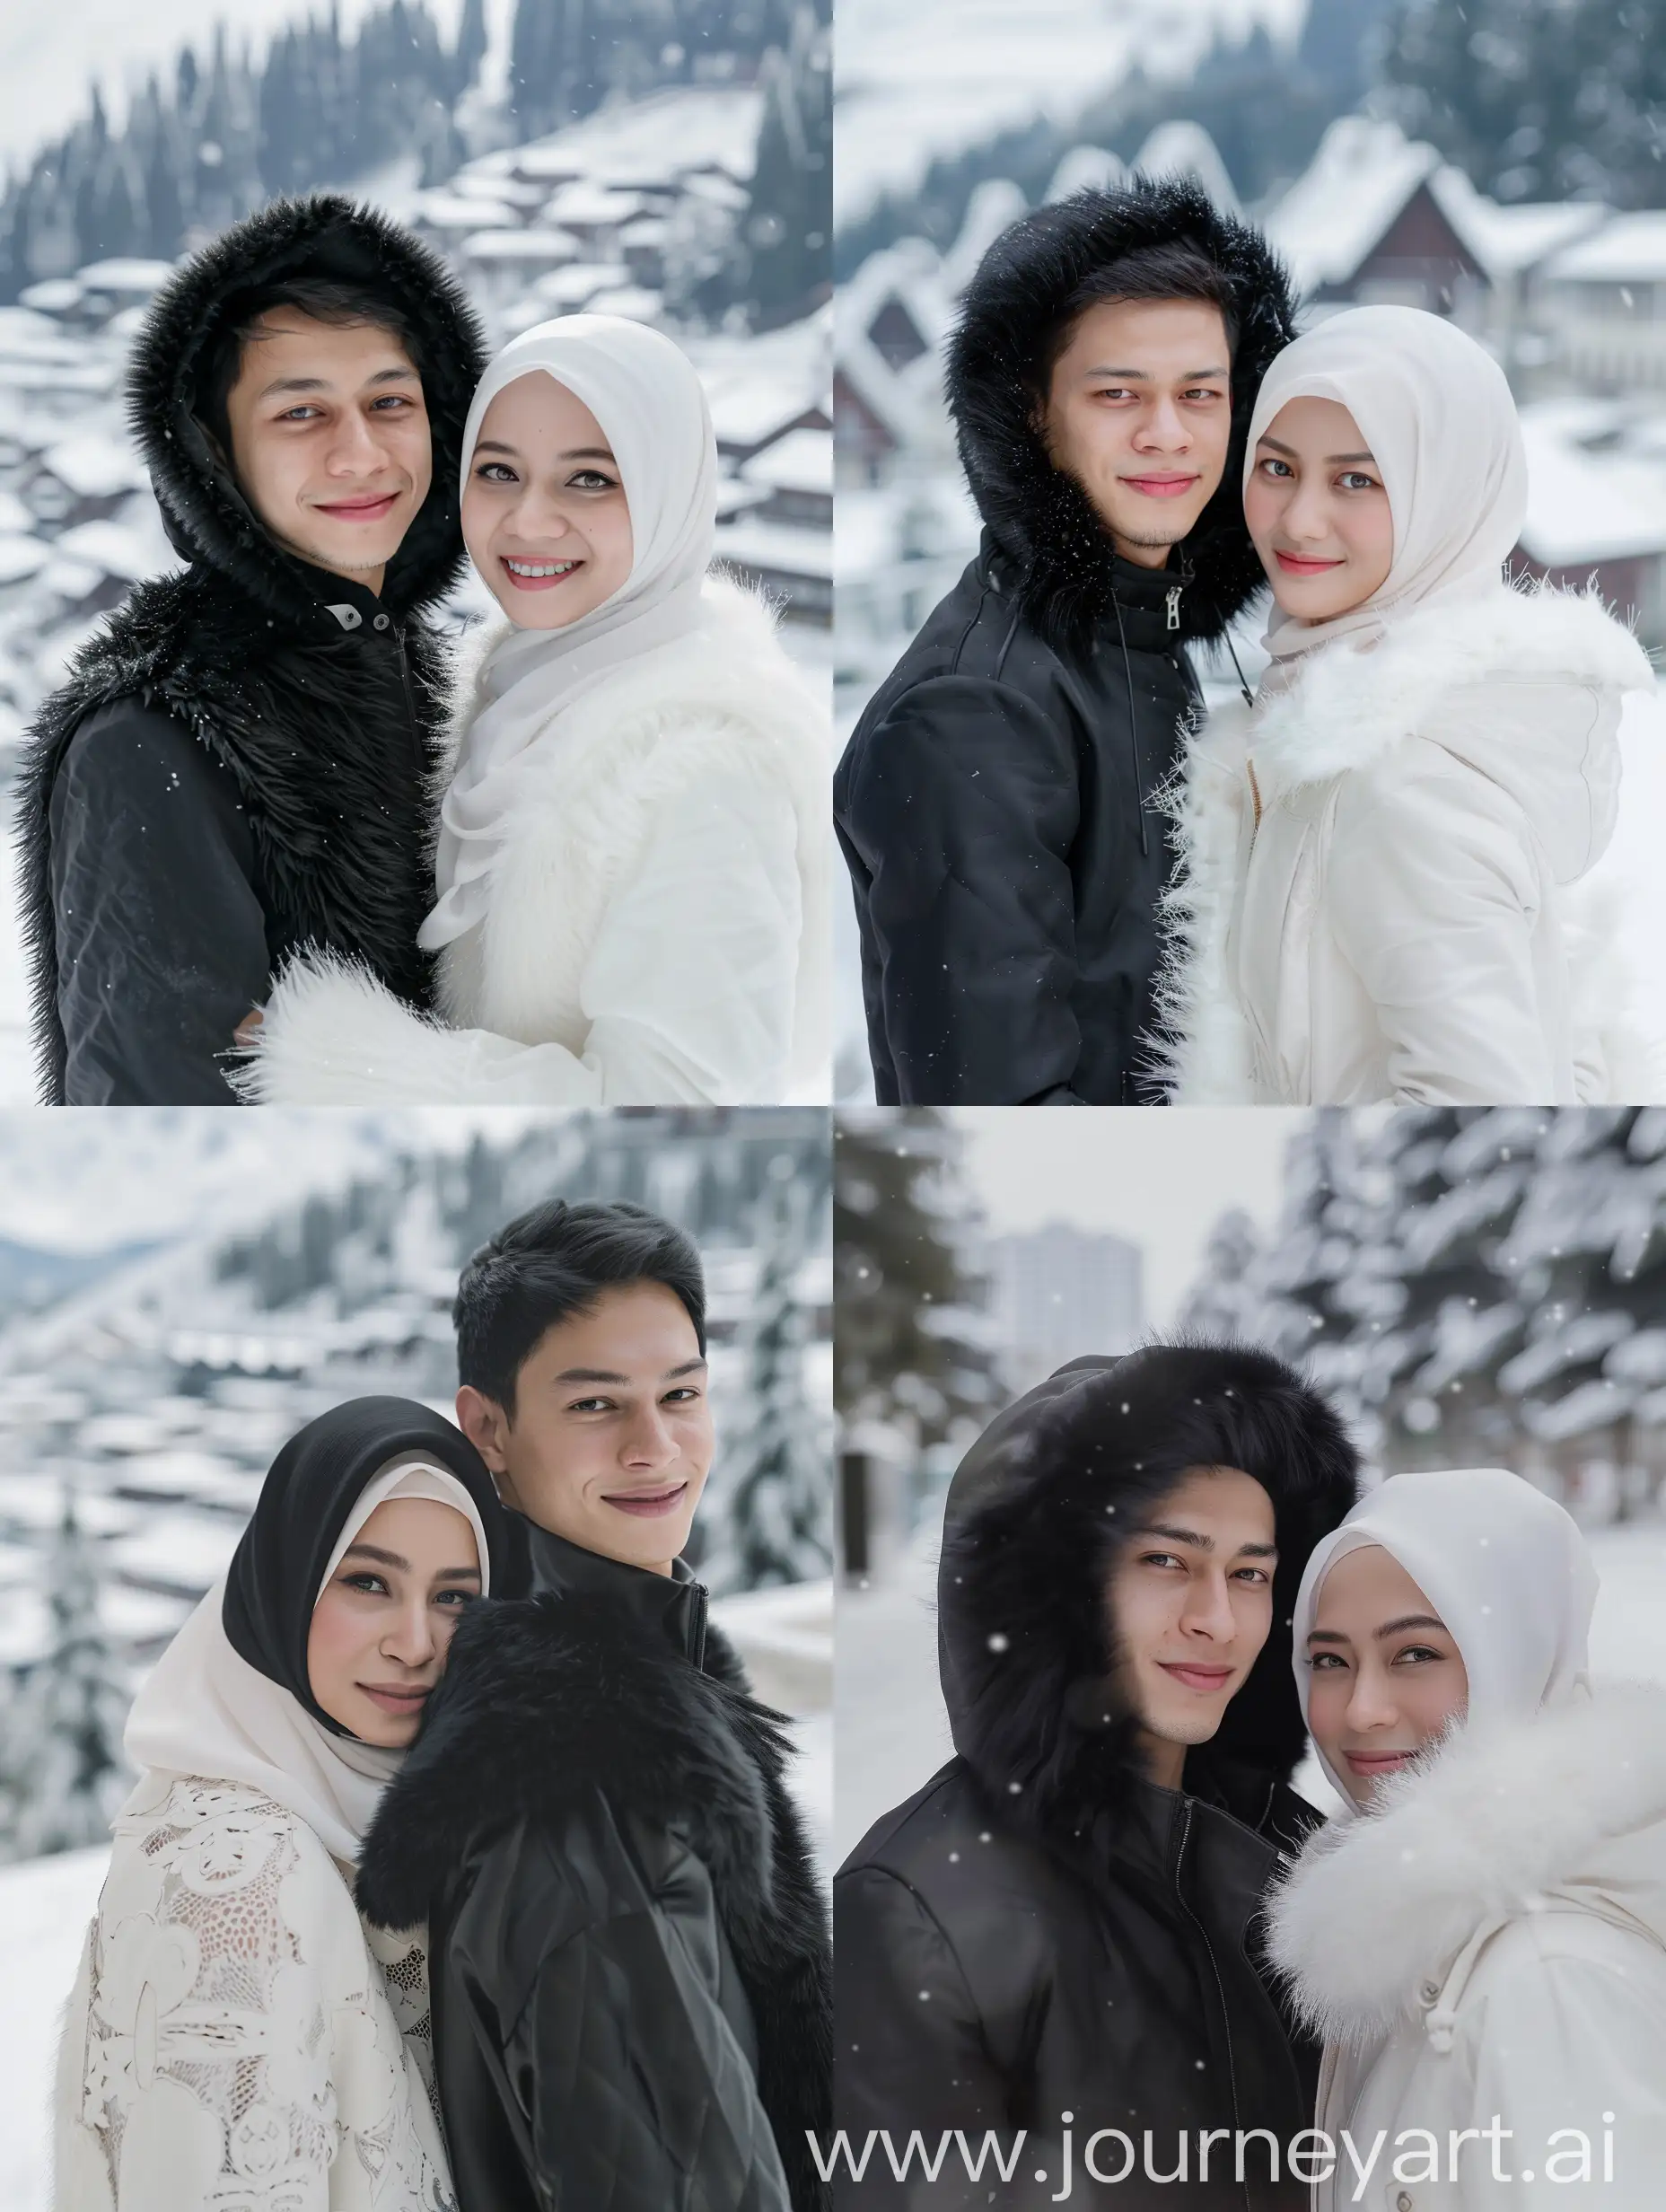 Stylish-Indonesian-Couple-in-Snowy-City-Fashionable-Winter-Portraits